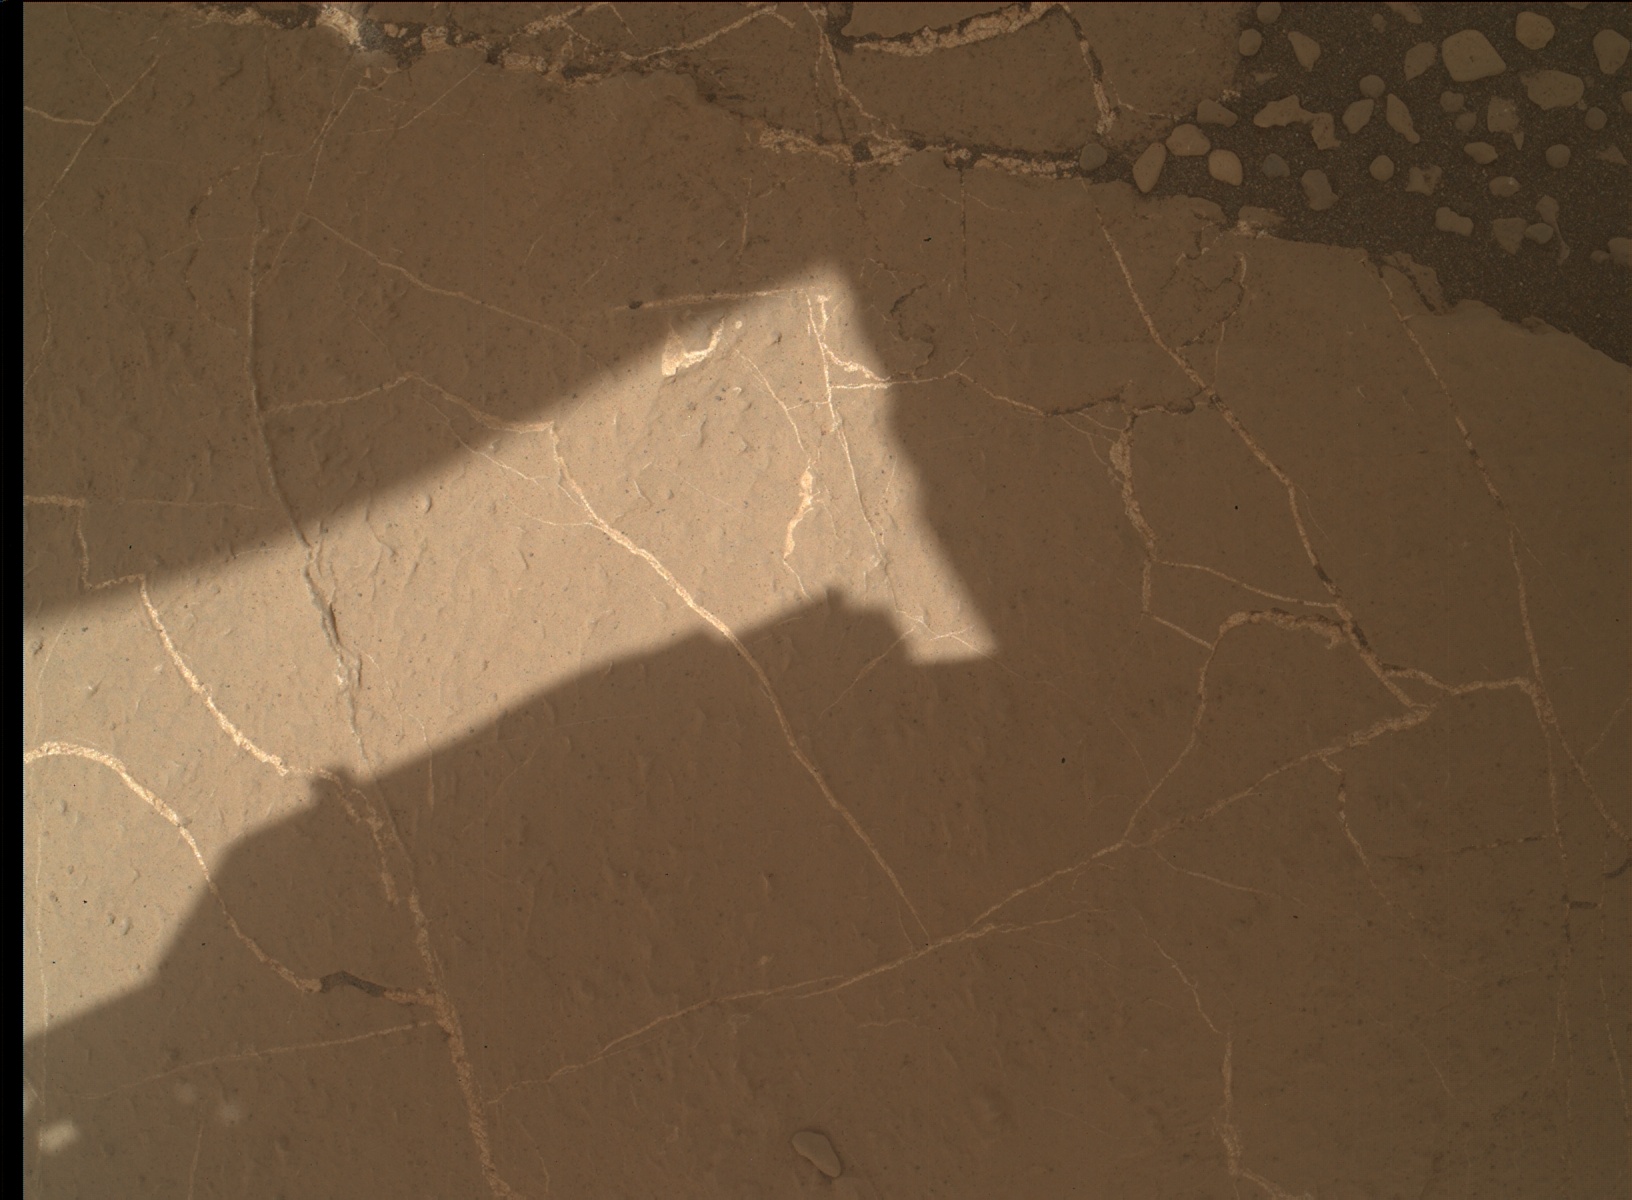 Nasa's Mars rover Curiosity acquired this image using its Mars Hand Lens Imager (MAHLI) on Sol 2658